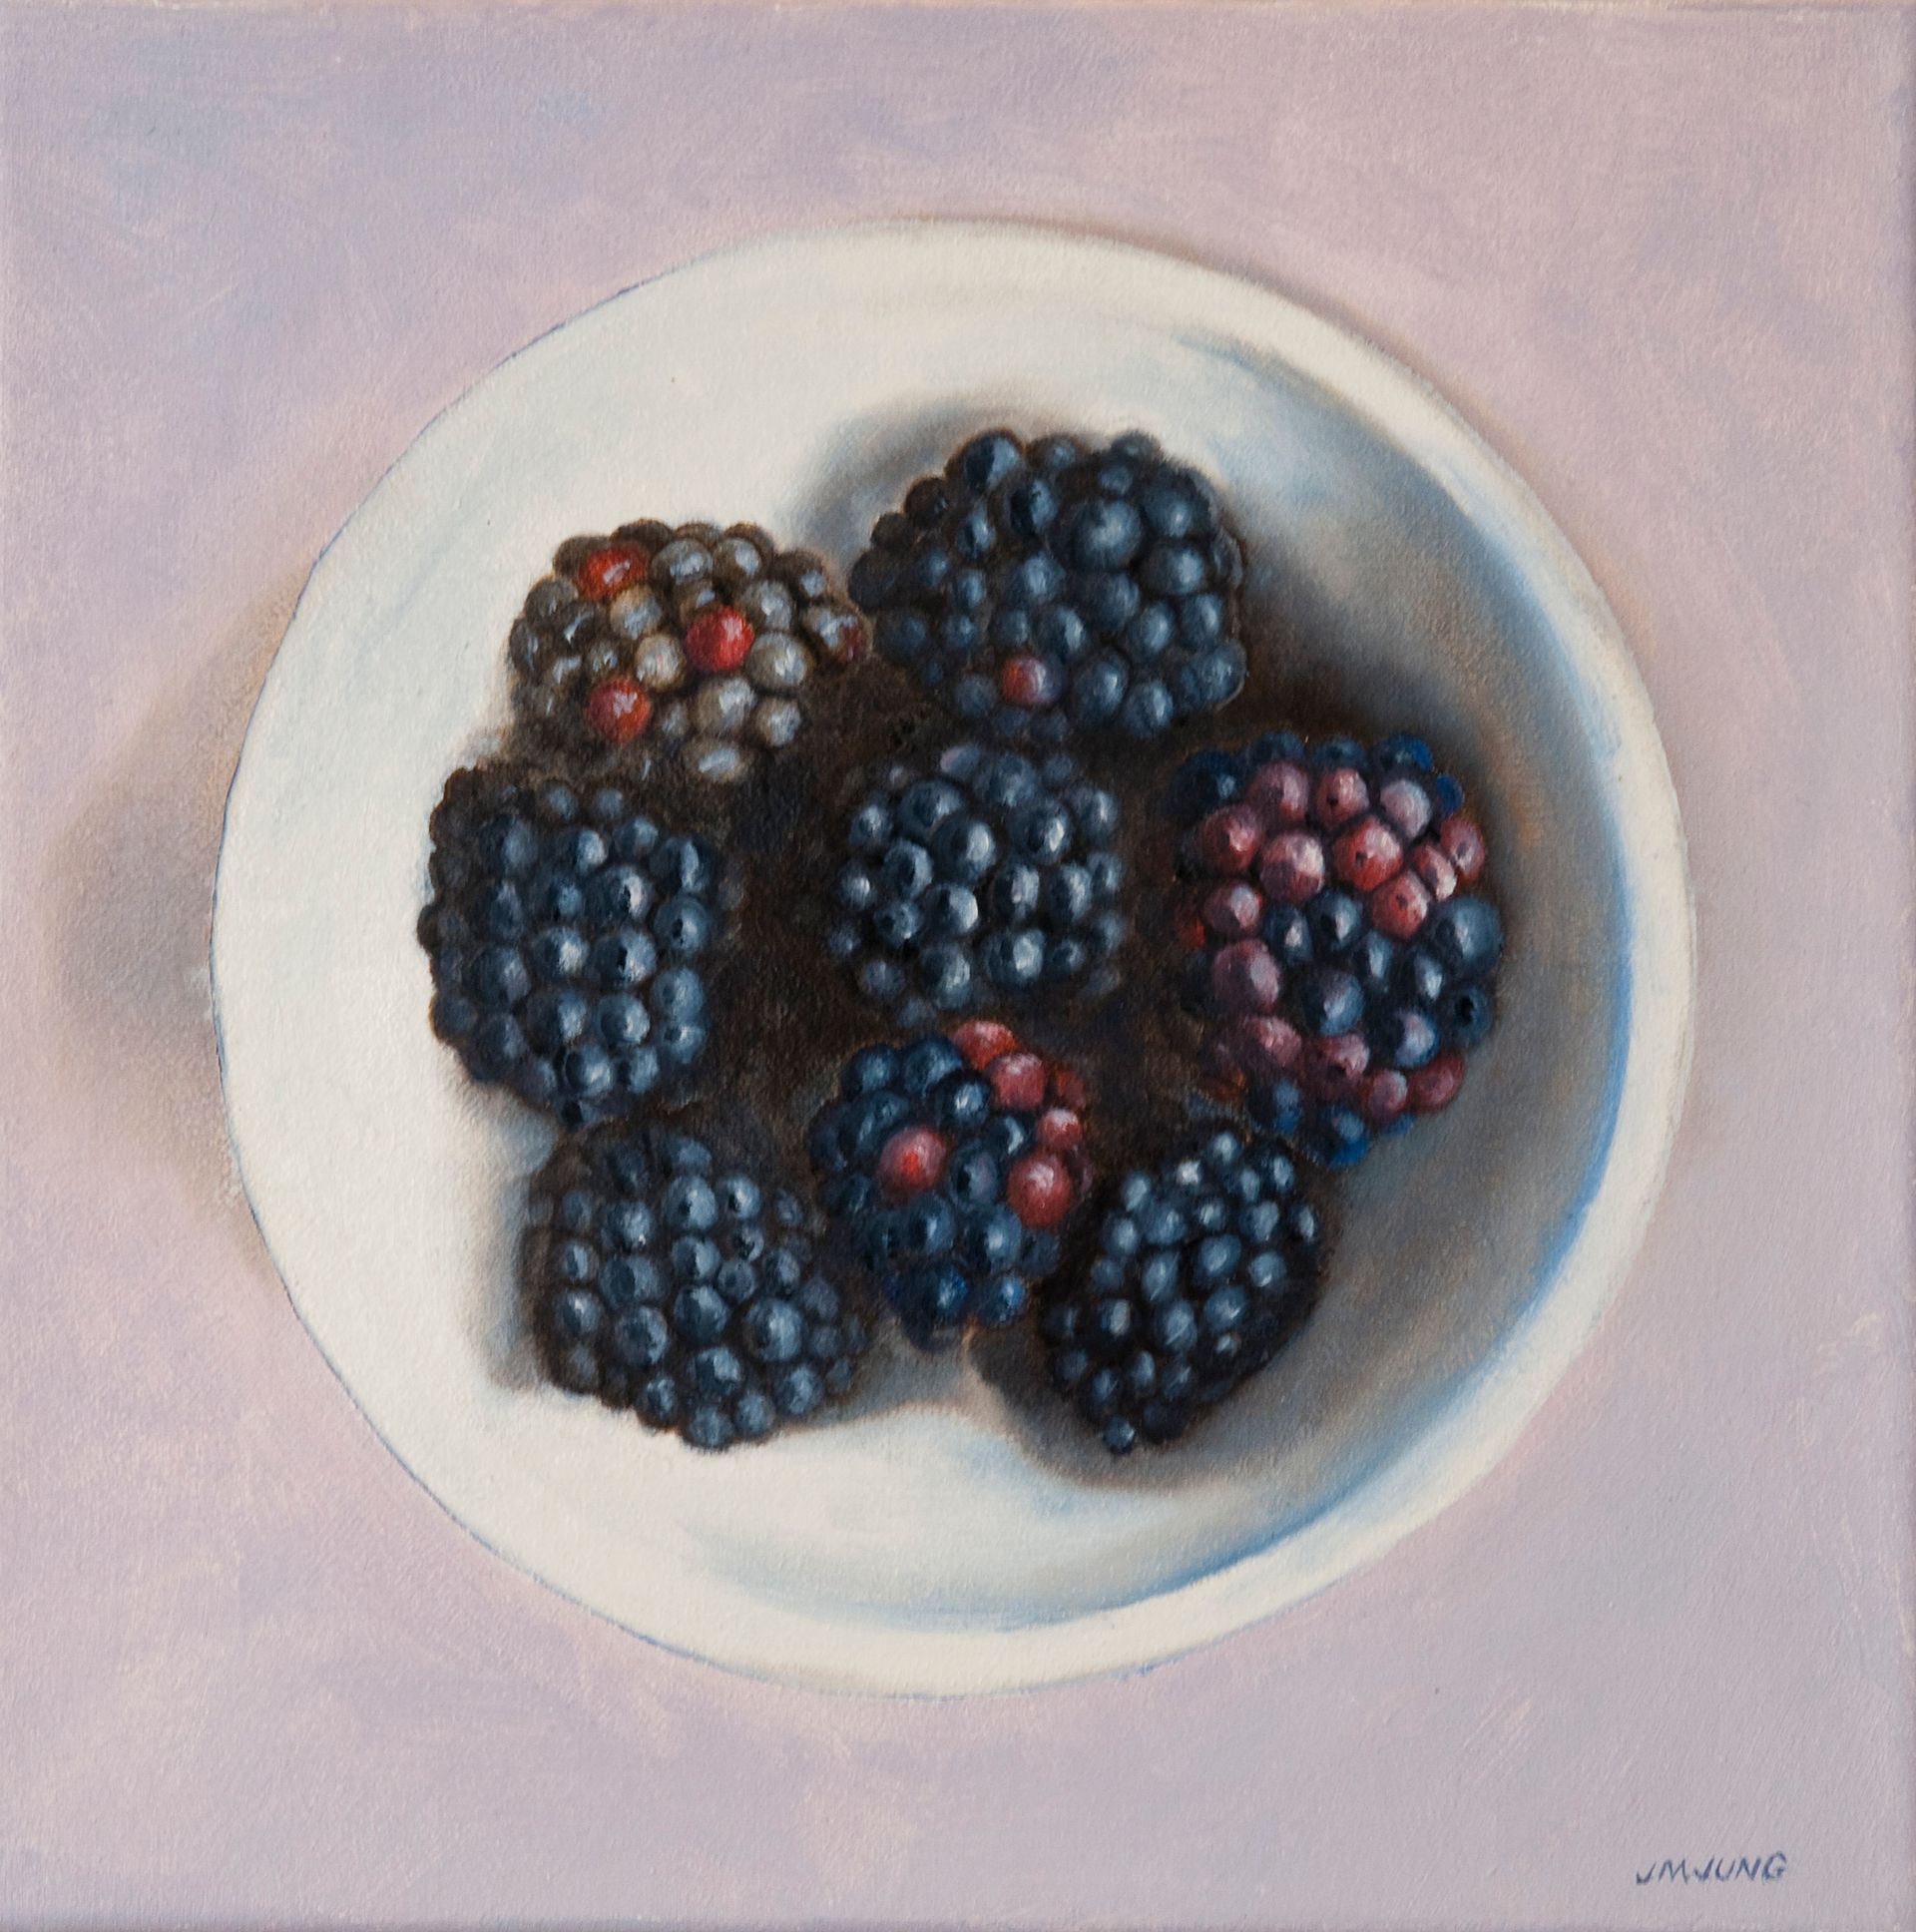 Eight juicy blackberries in a white bowl. The background is a soft lavender.